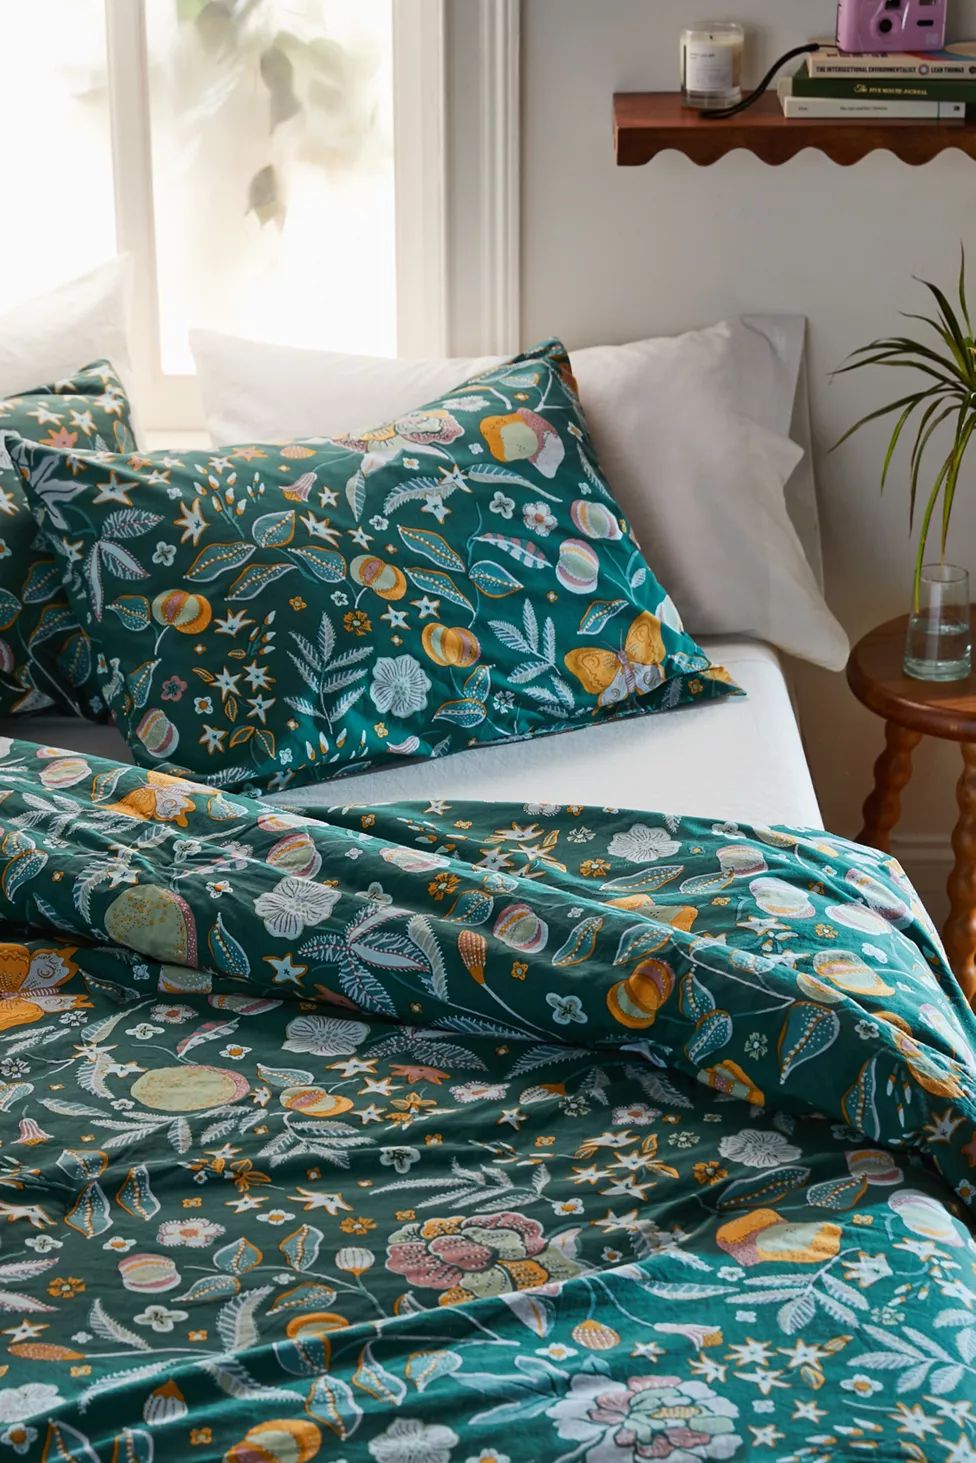 You May Also Like

              
            Myla Floral Comforter Set
            
            ... | Urban Outfitters (US and RoW)